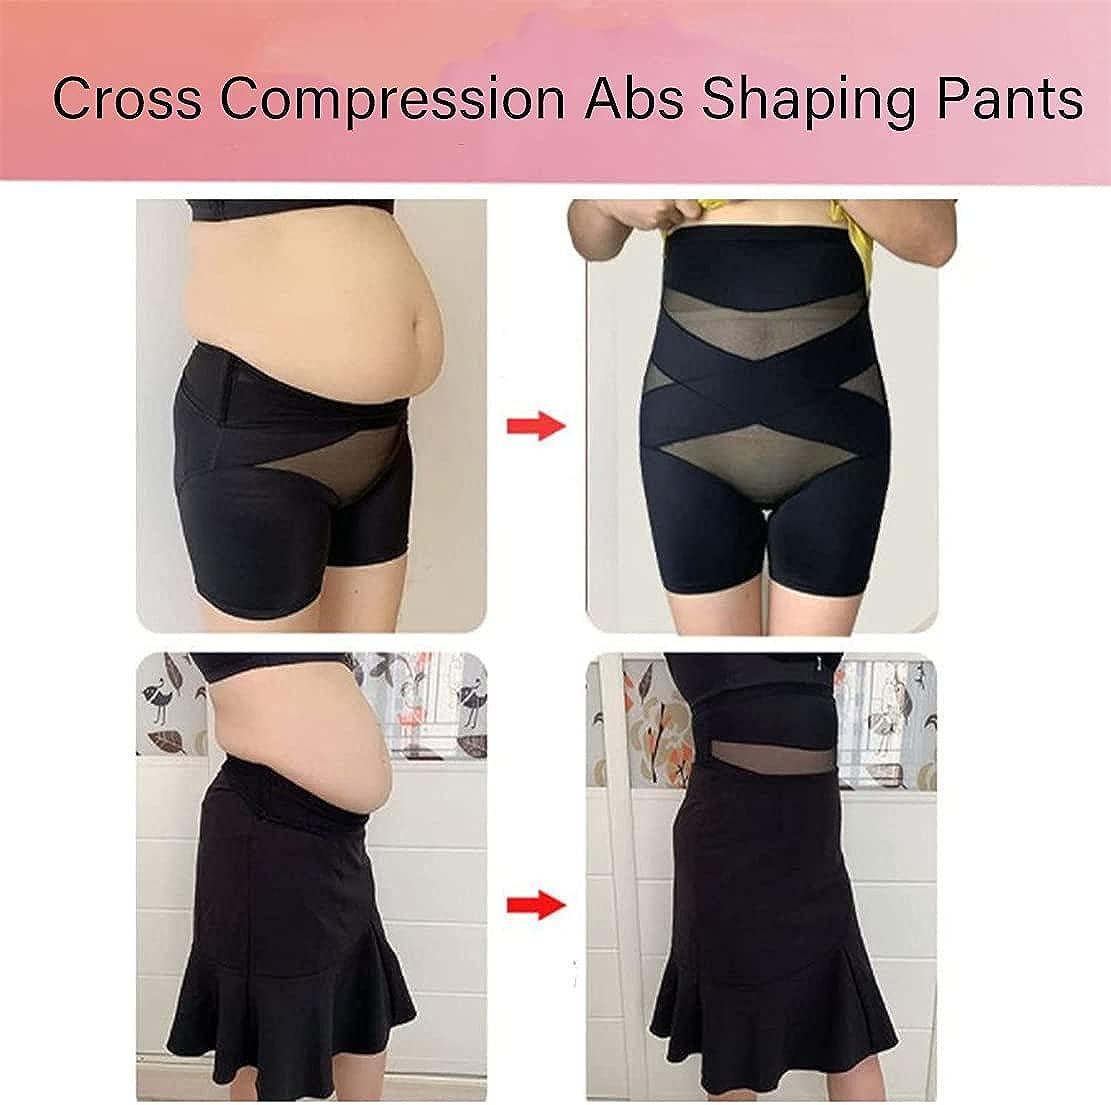 Cross Compression Abs Shaping Pants for Women Tummy Control Butt Lift  Slimming Body Shaper Beige Medium